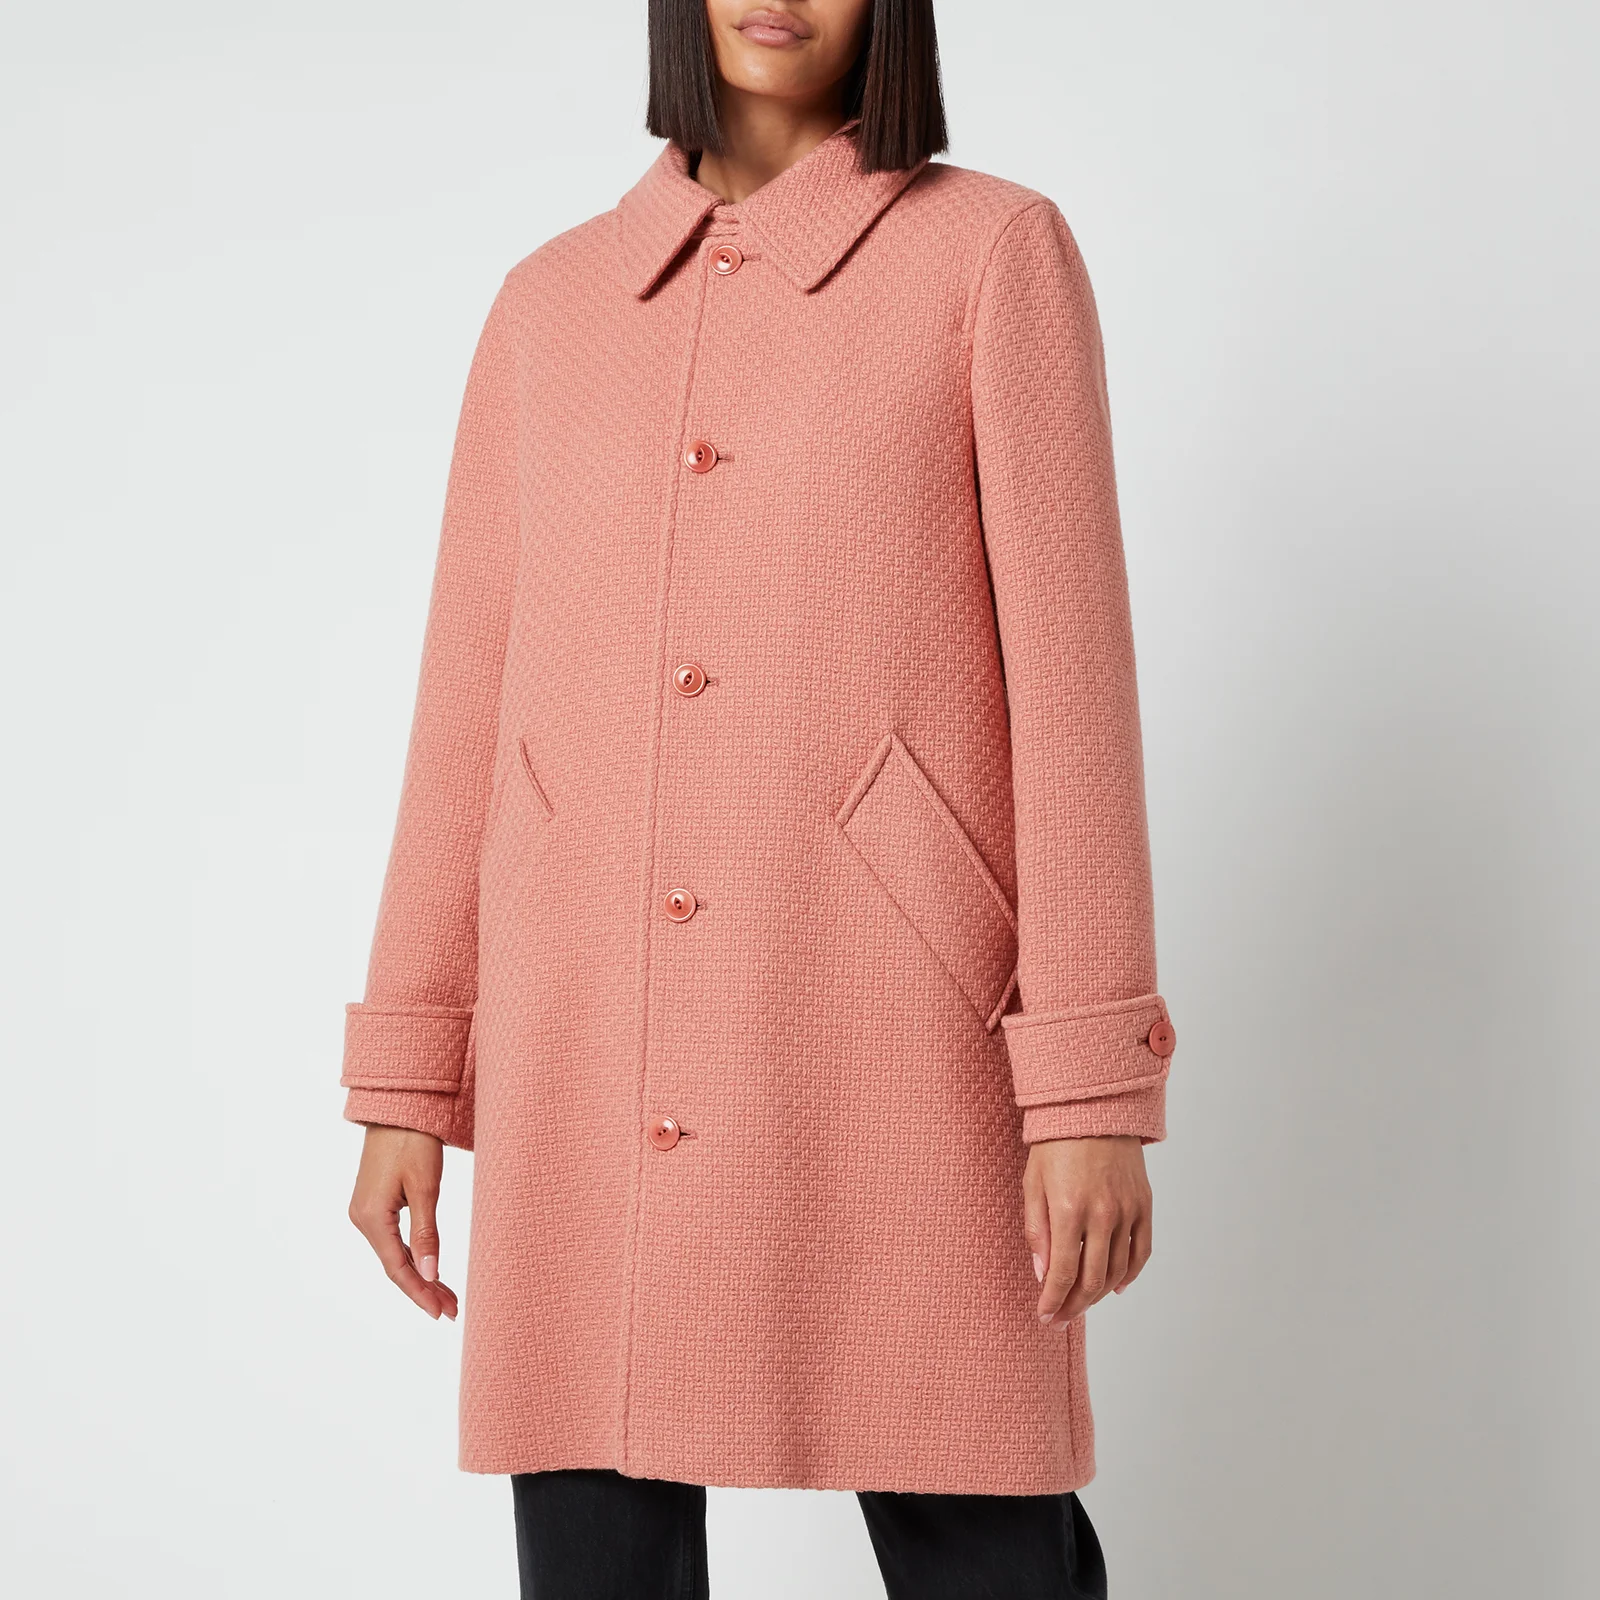 A.P.C. Women's Suzanne Coat - Old Pink Image 1